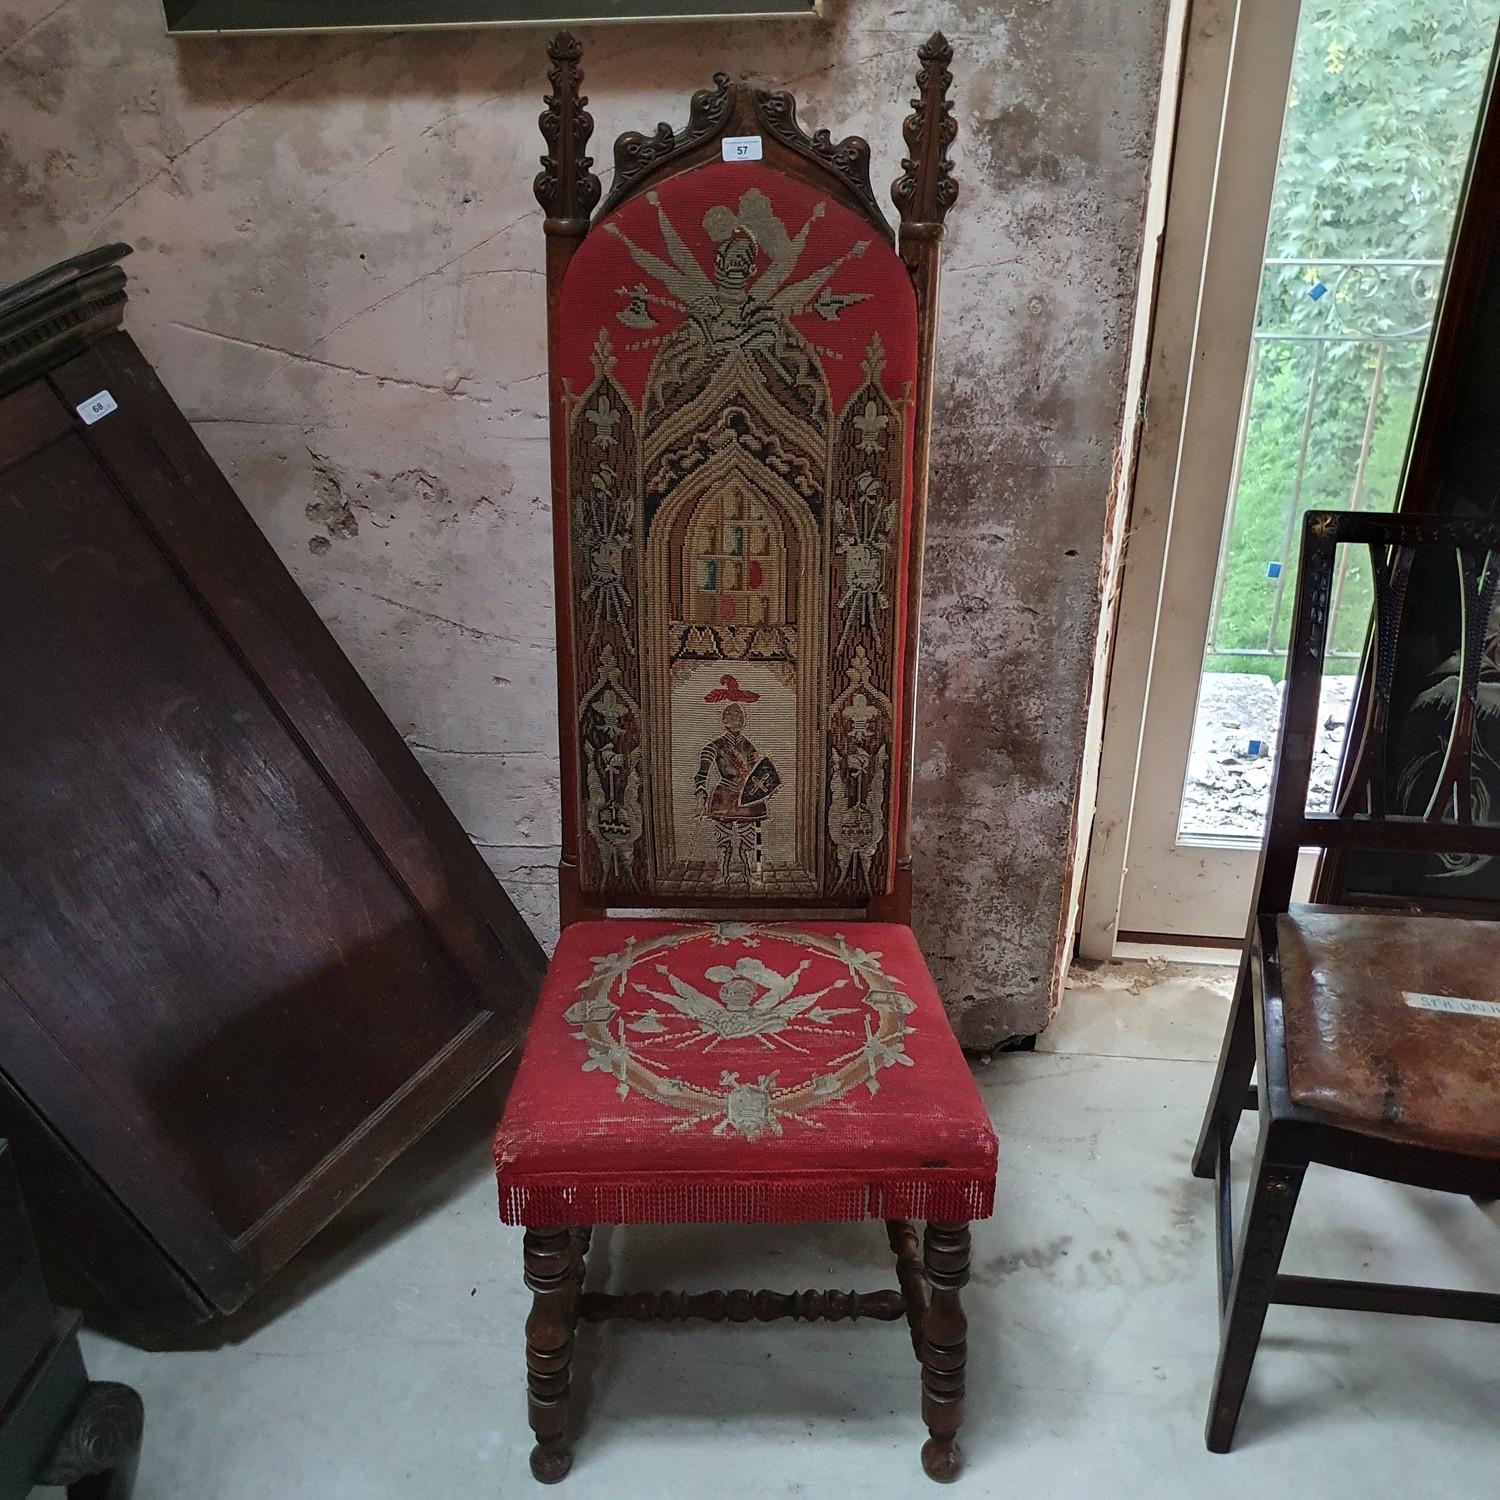 A Victorian Gothic walnut prie dieu chair, with needlework upholstery, wormed, lacks finial